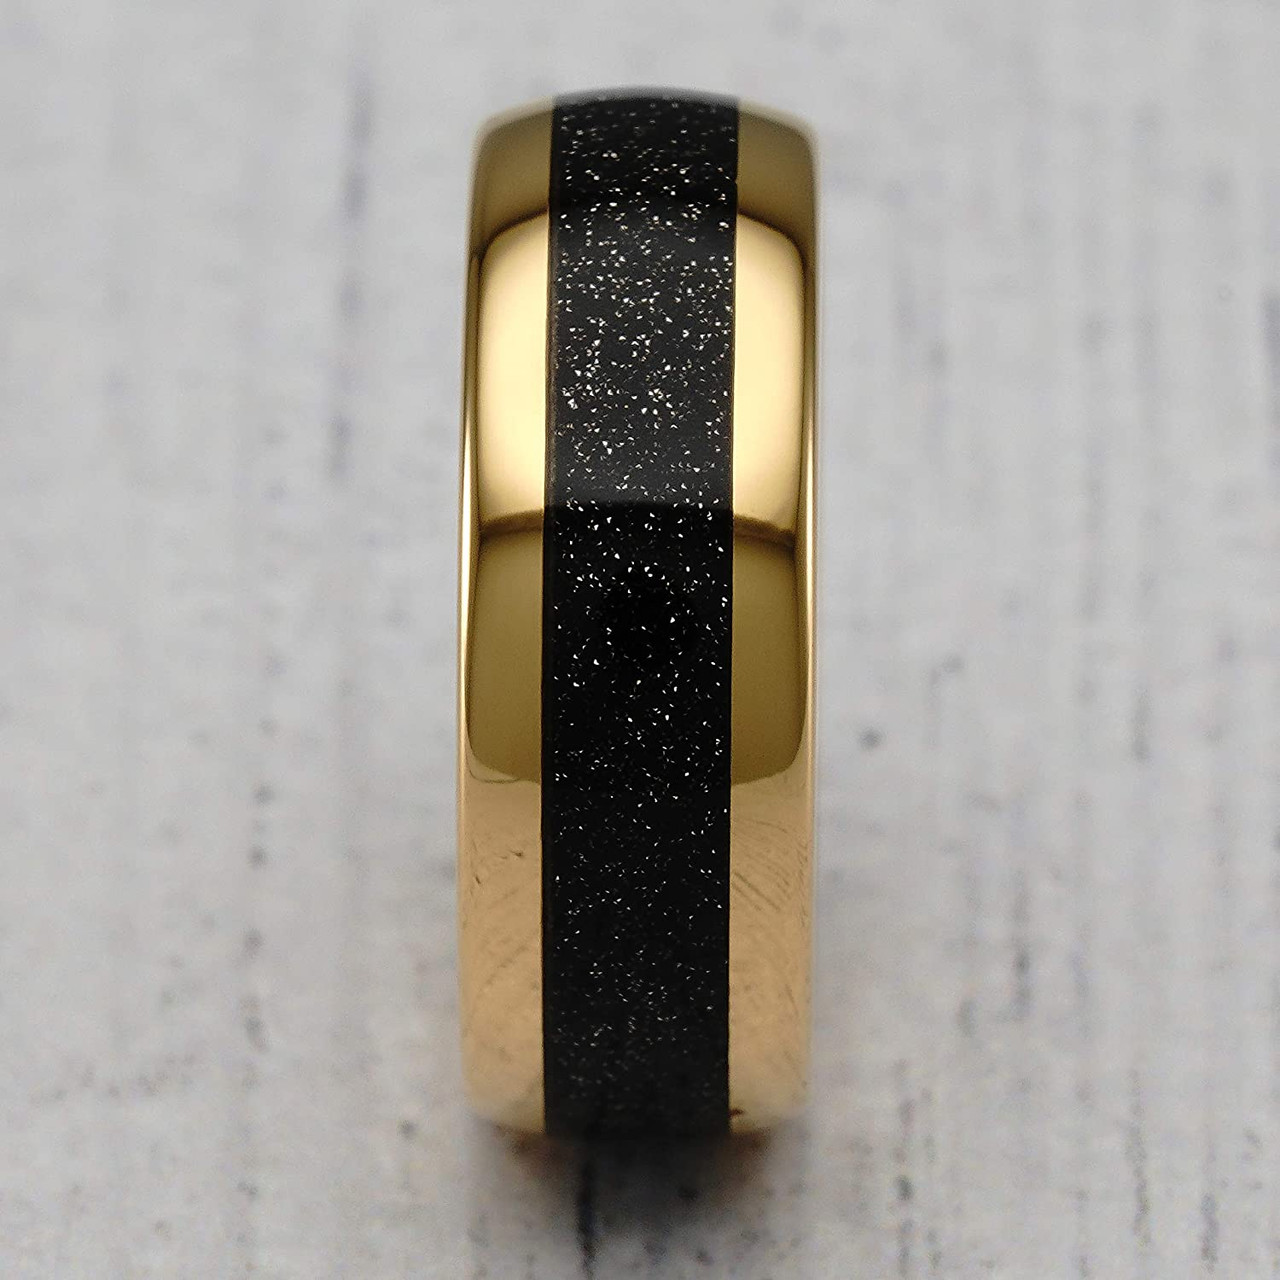 (8mm) Unisex or Men's Black and 14 Karat Gold Dome Top Tungsten Carbide Wedding Ring Band